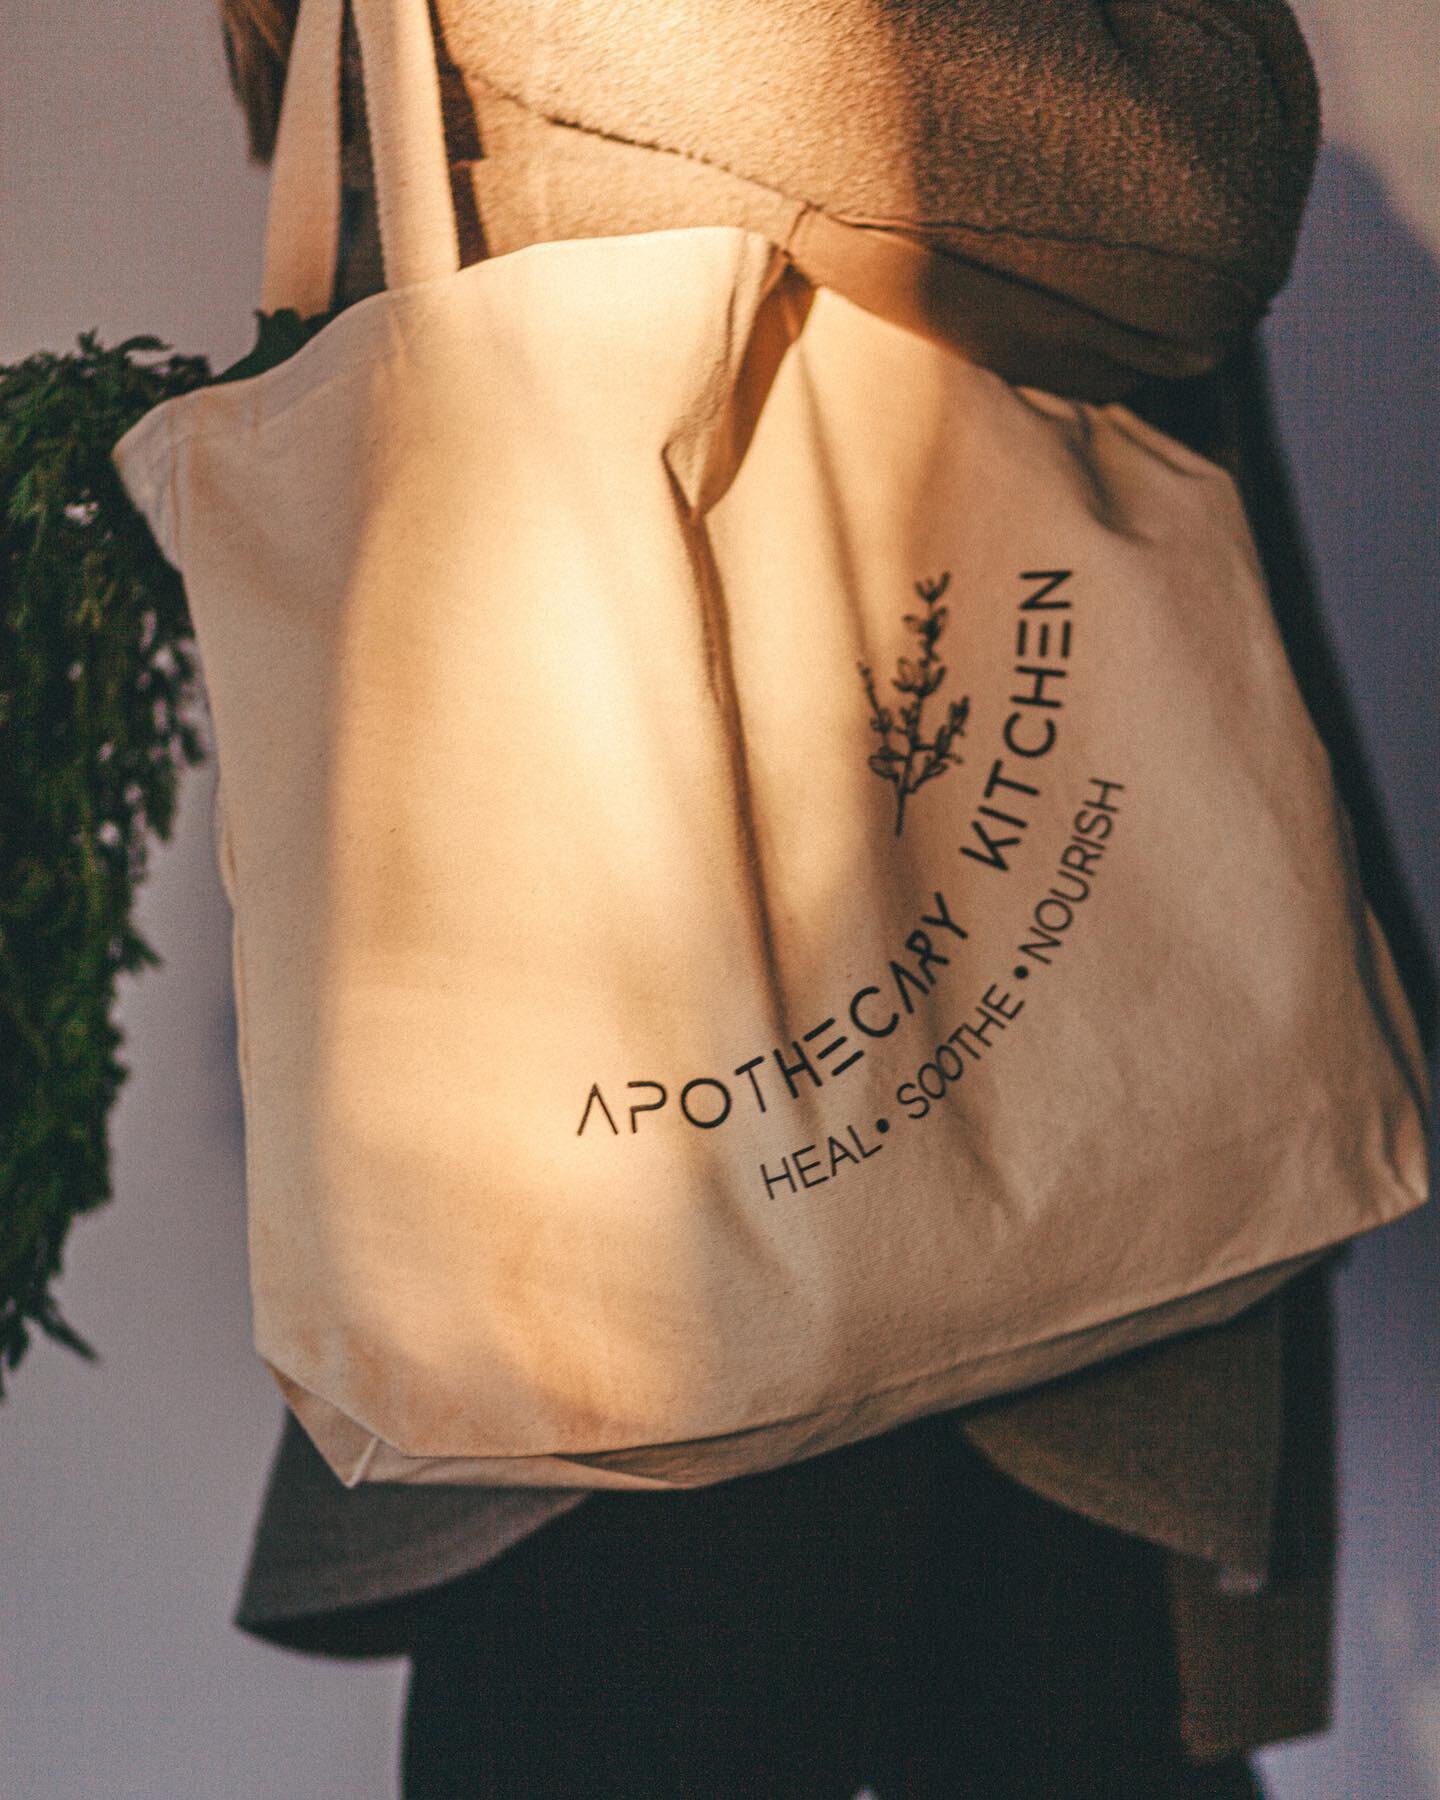 our favourite bag to bring to the Farmer&rsquo;s Market or other shops &mdash; with a flat bottom and ample space, you can fit all of the essentials 

🥕🌽🥬🍎🥦🥑🥚🍓🥖

add to your next order!